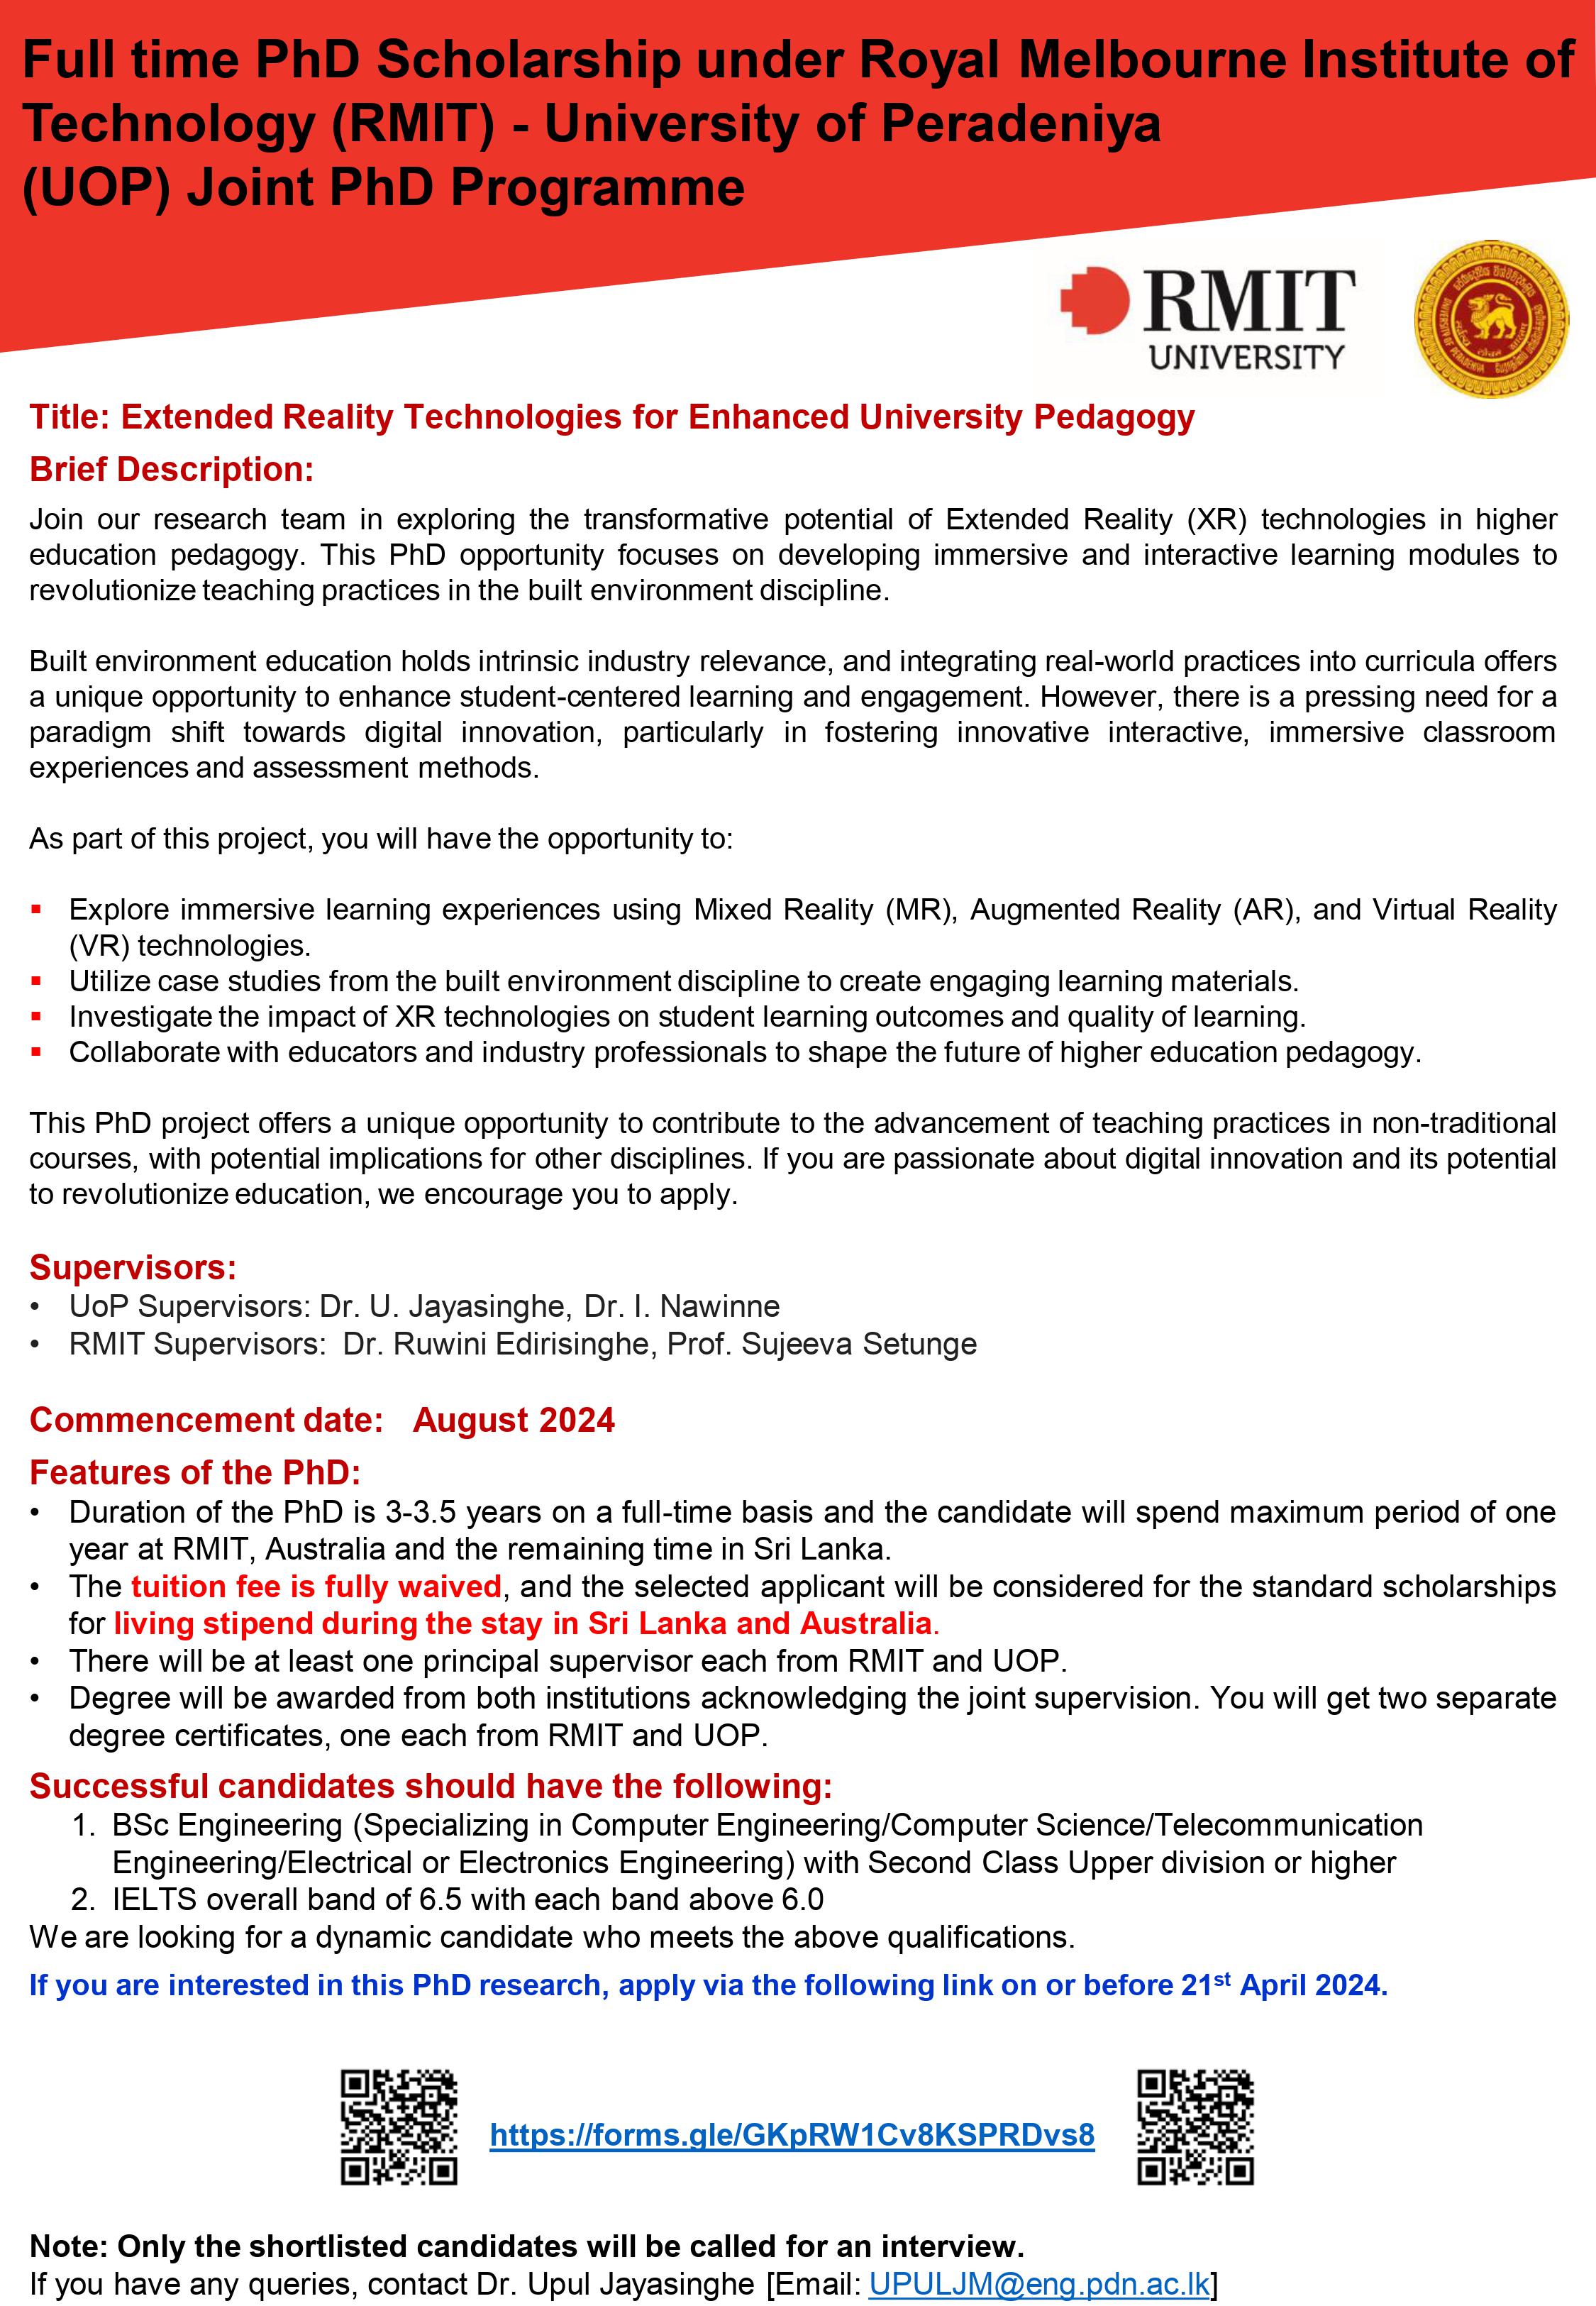 Advertisement Flyer - PhD Research on Extended Reality